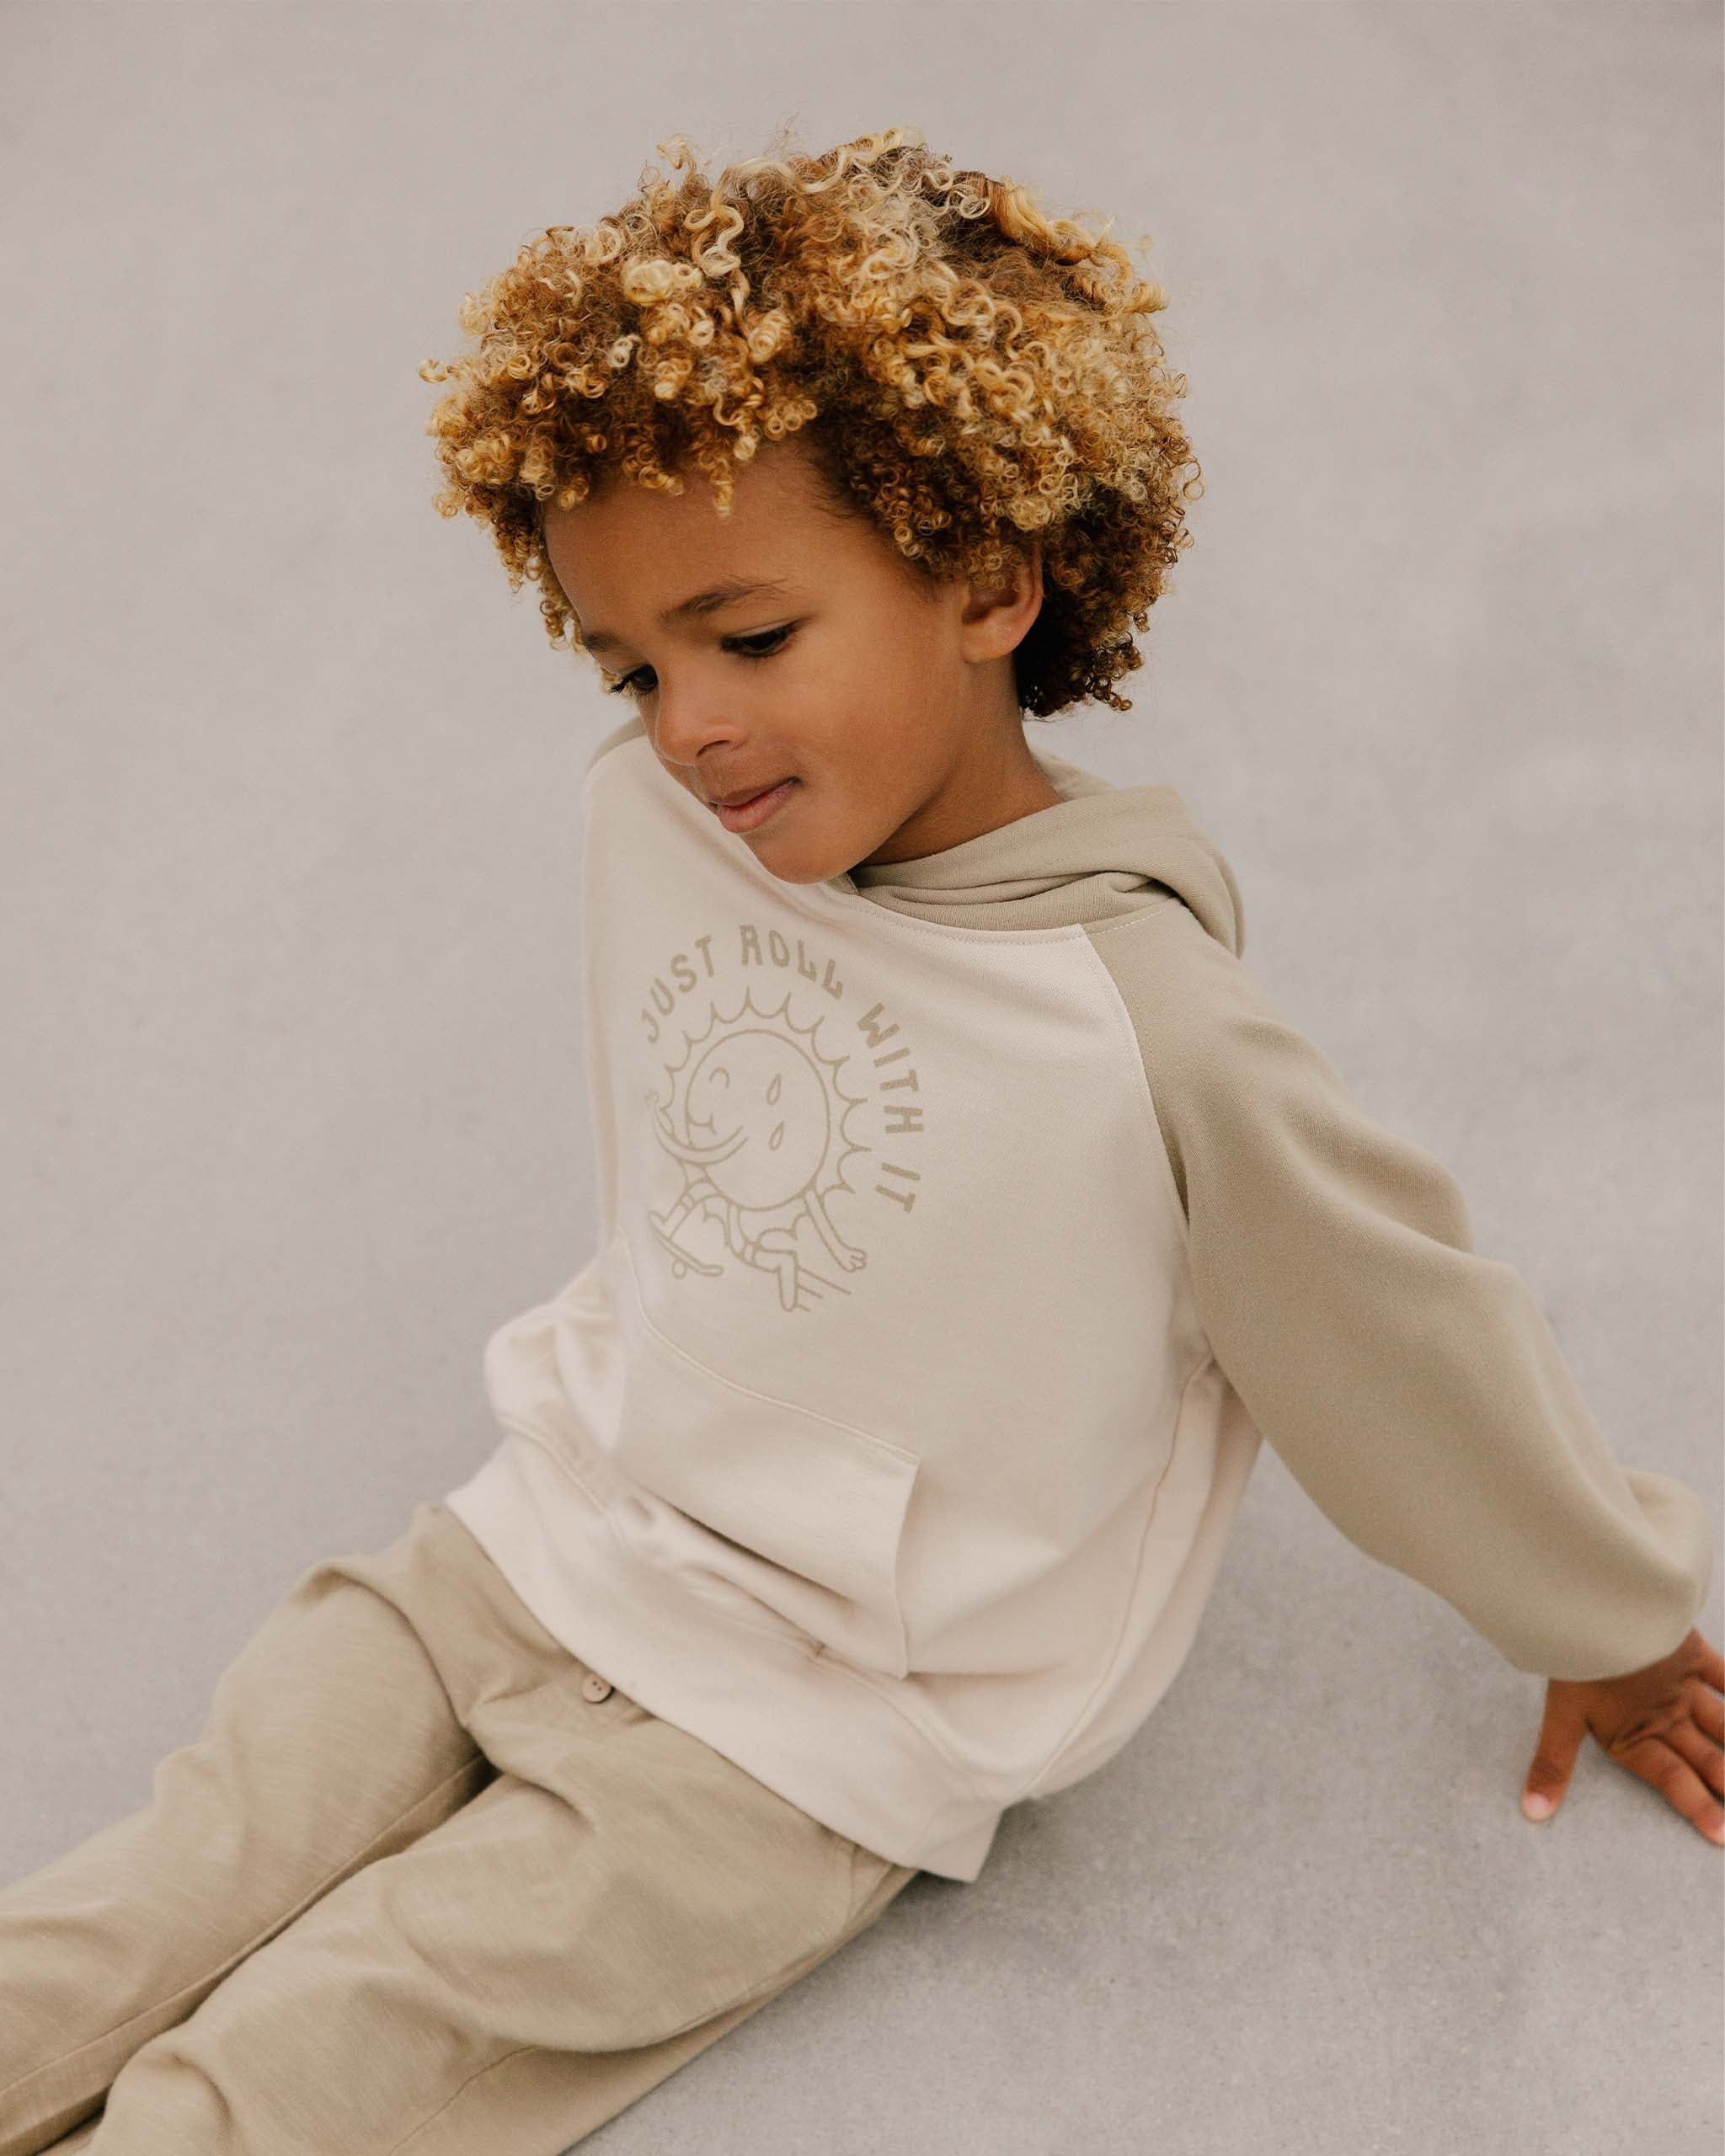 Raglan Hoodie || Just Roll With It - Rylee + Cru | Kids Clothes | Trendy Baby Clothes | Modern Infant Outfits |